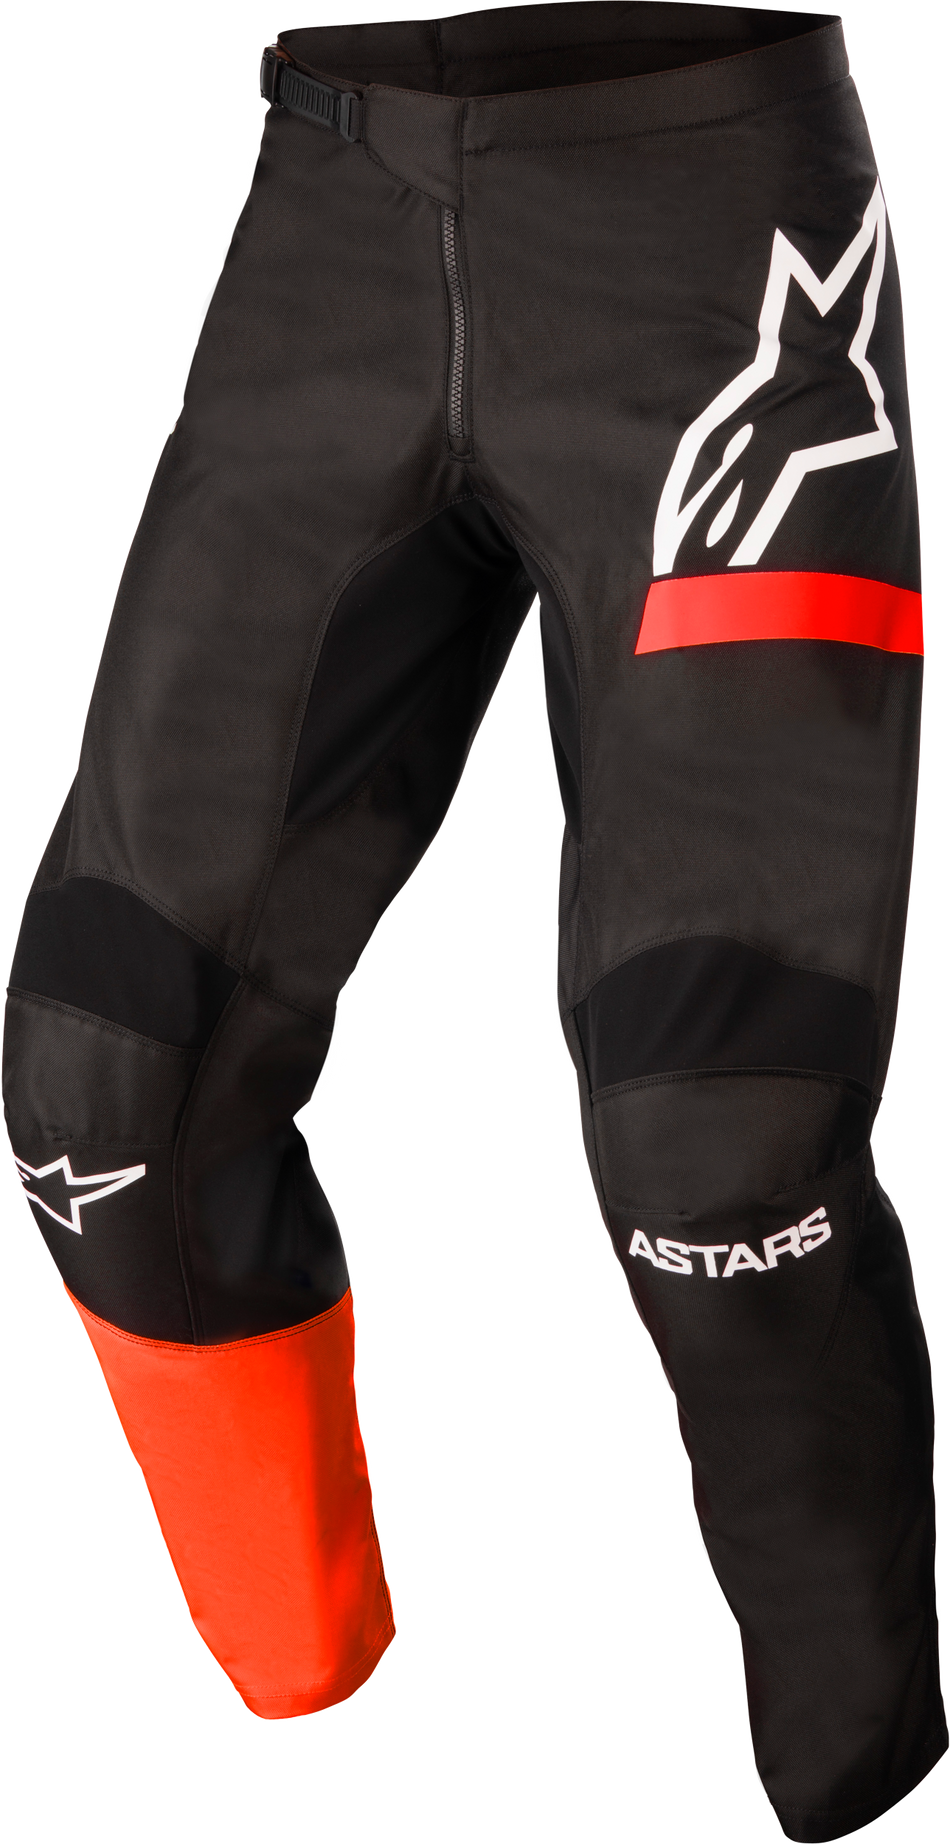 ALPINESTARS Youth Racer Chaser Pants Black/Bright Red Sz 22 3742422-1303-22